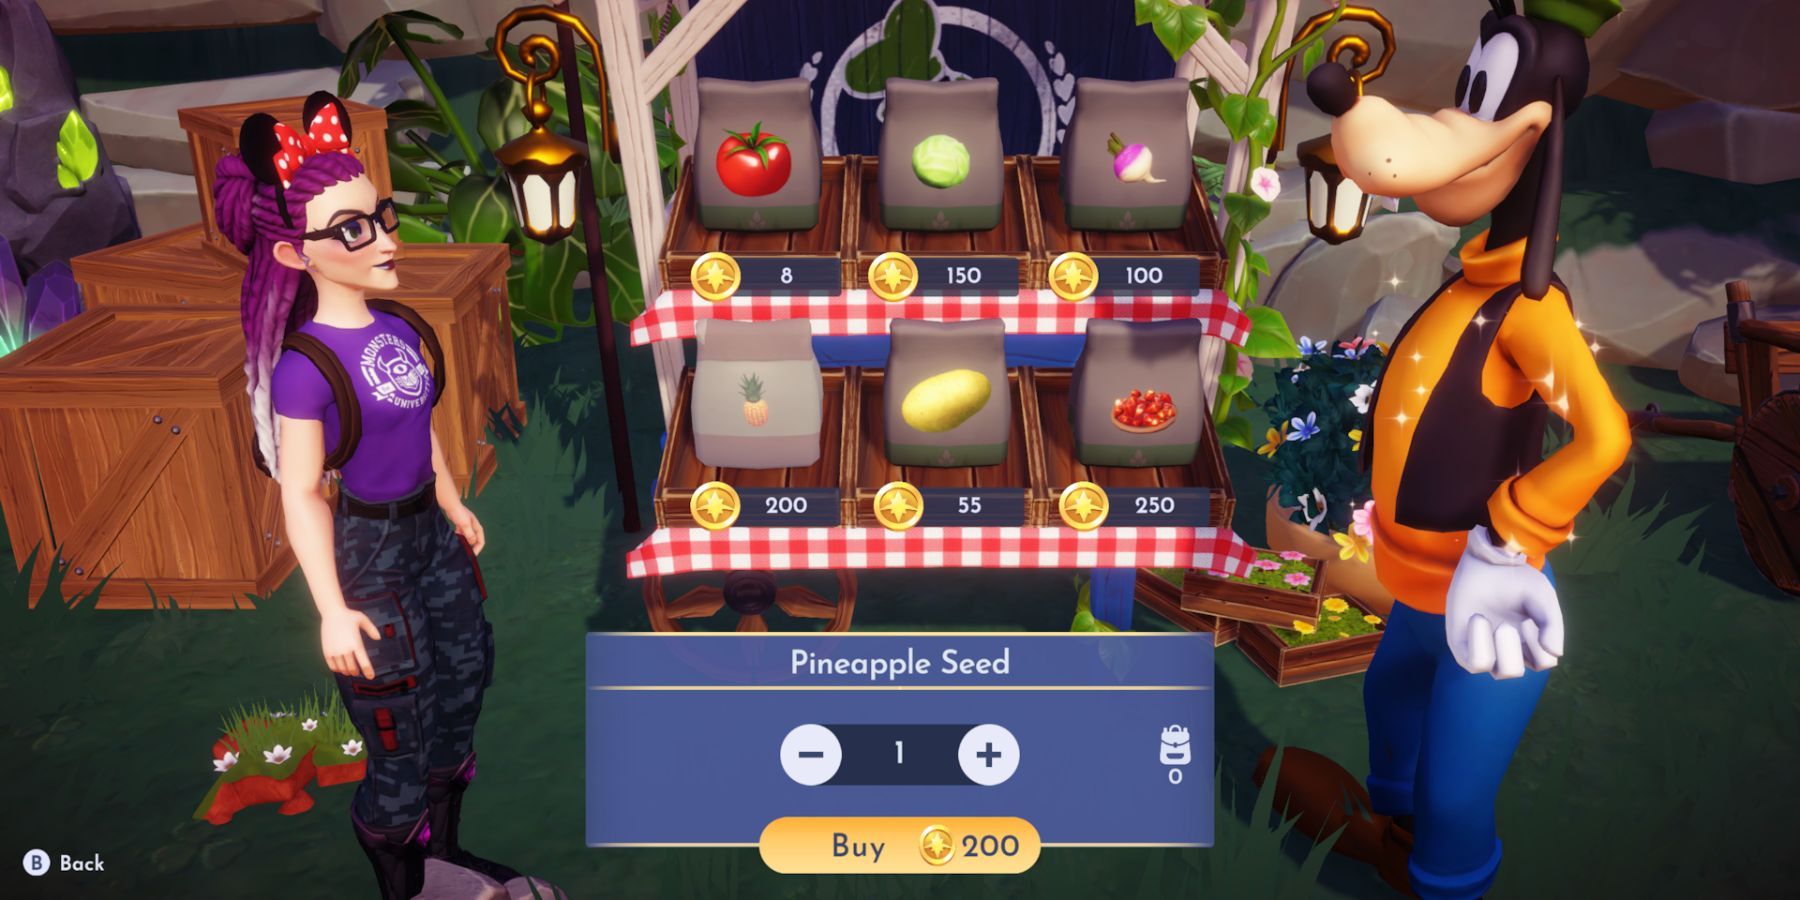 Disney dreamlight valley buying pineapple seeds from goofy stall 